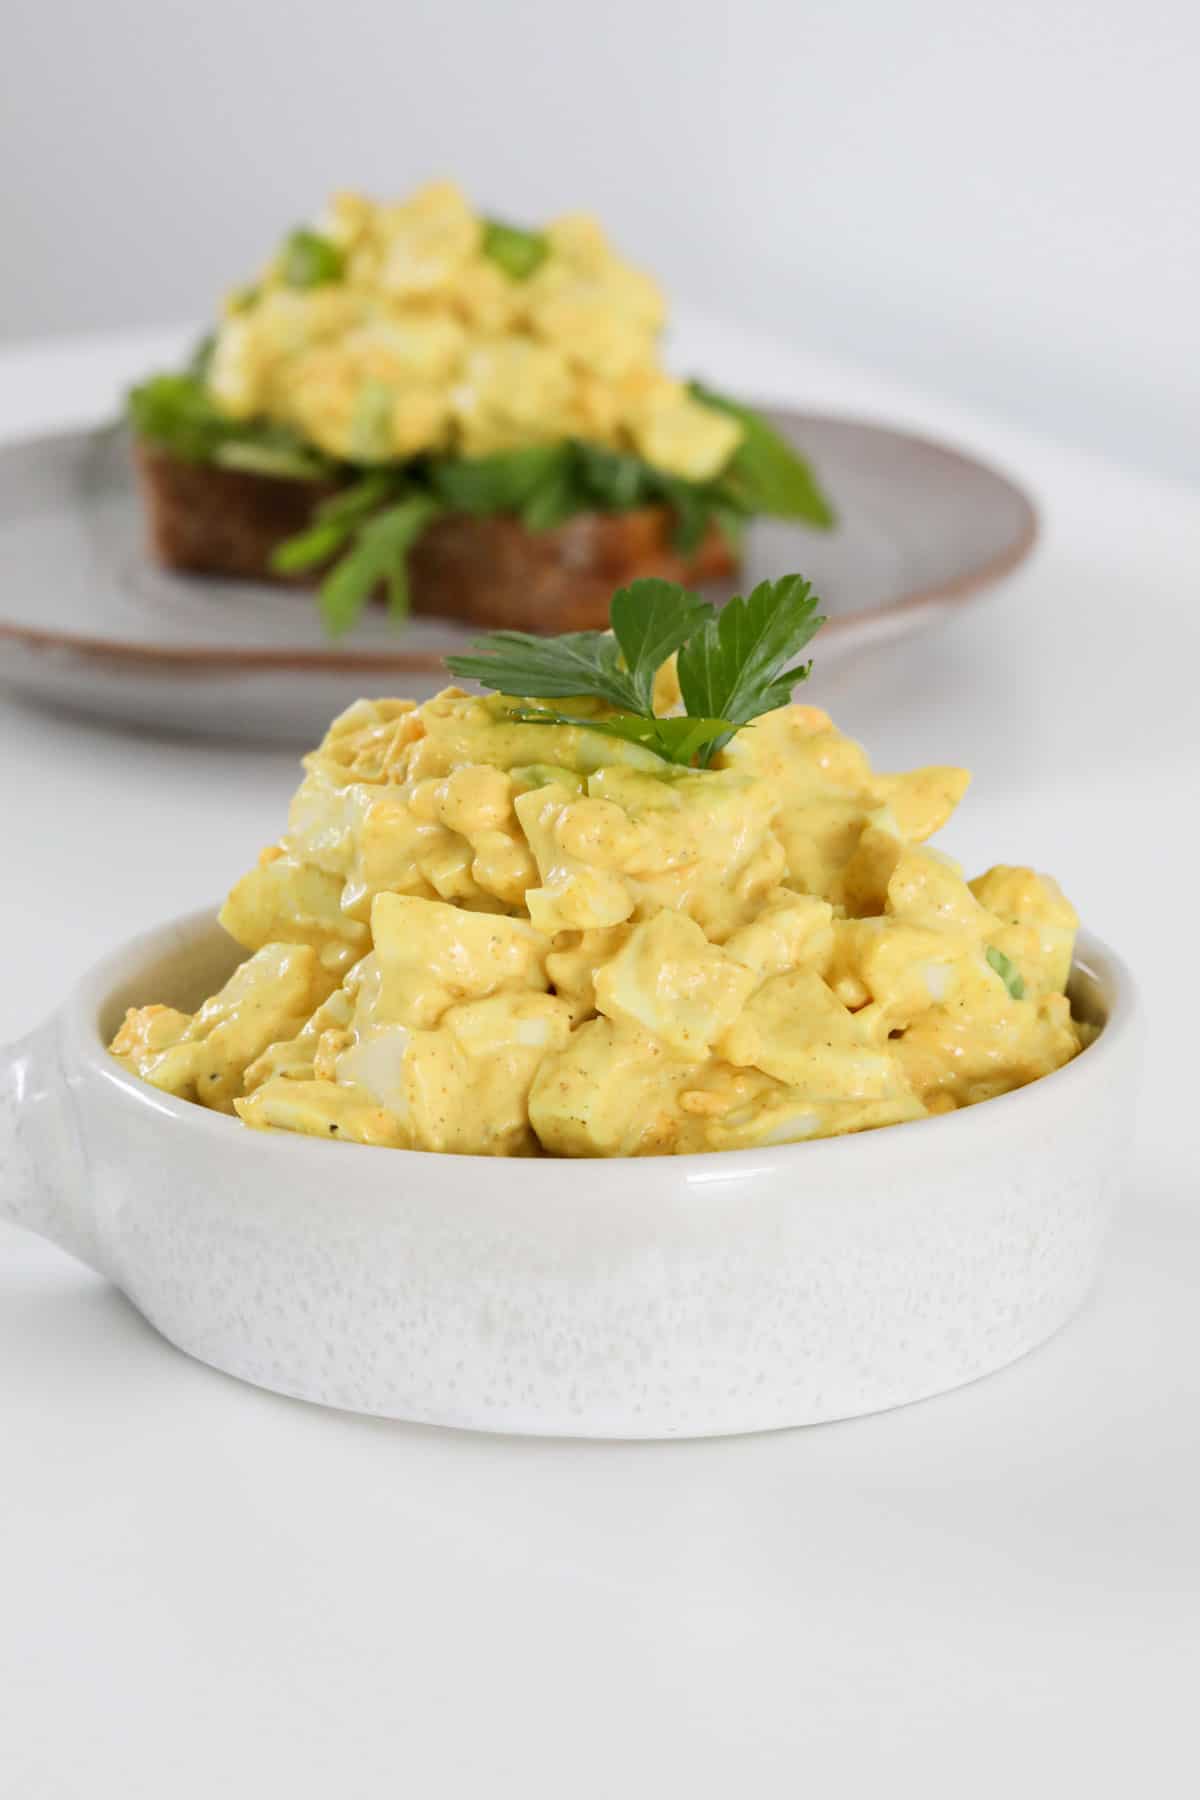 Curriend egg salad in a white bowl with a sprig of parsley on top.